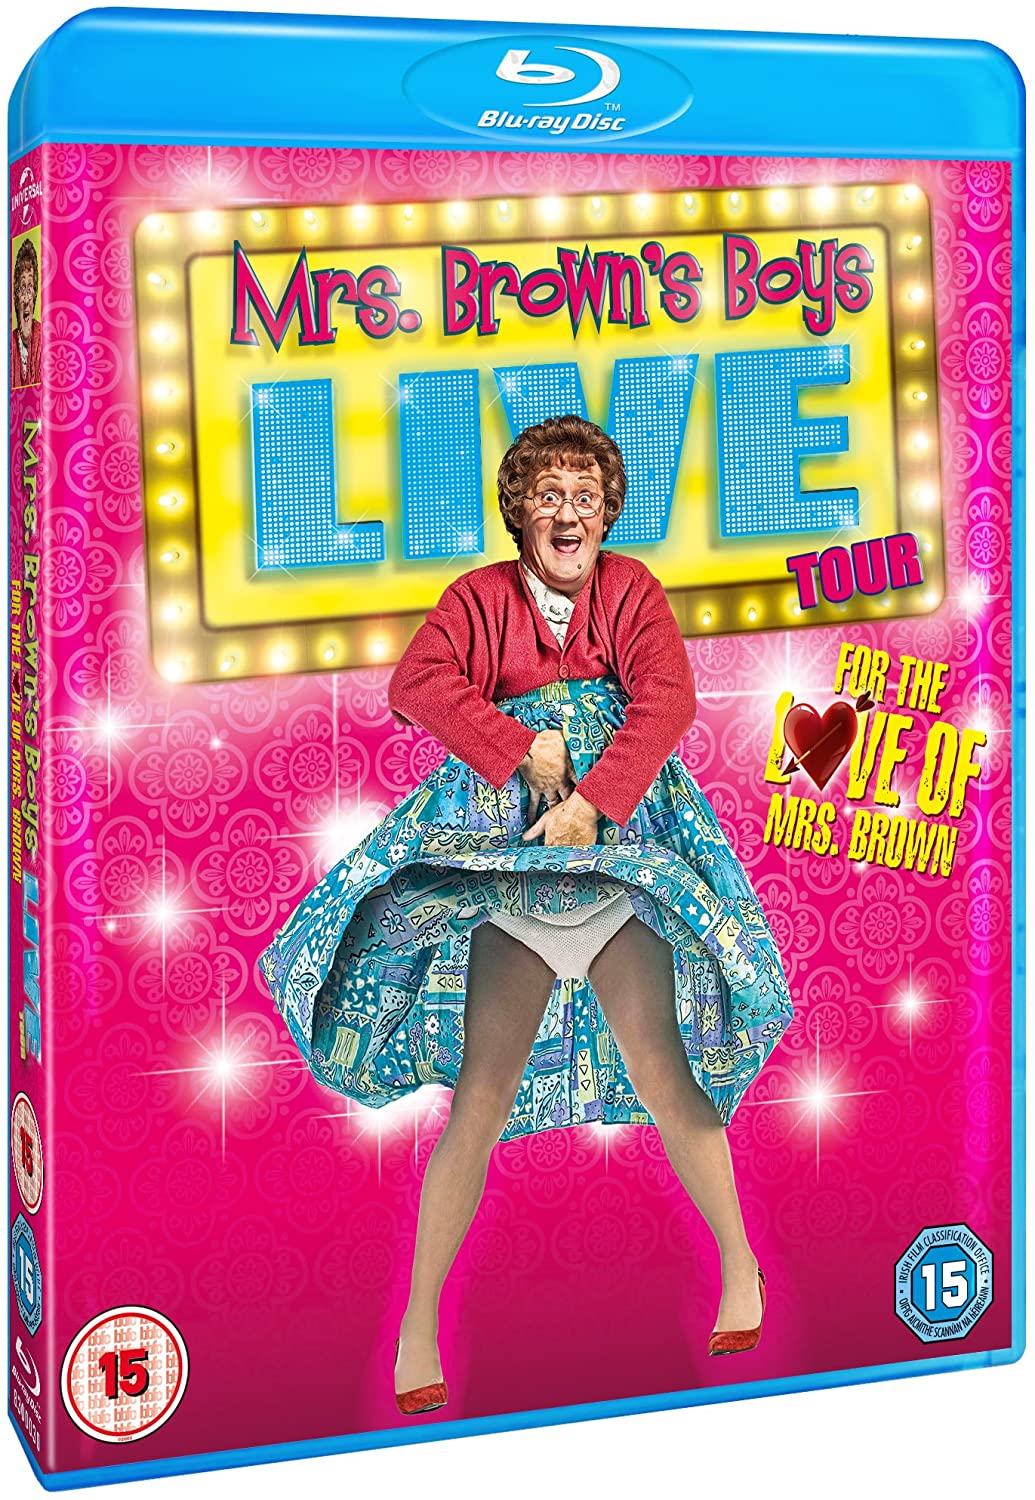 Mrs Brown's Boys Live Tour - For the Love of Mrs Brown [2013]